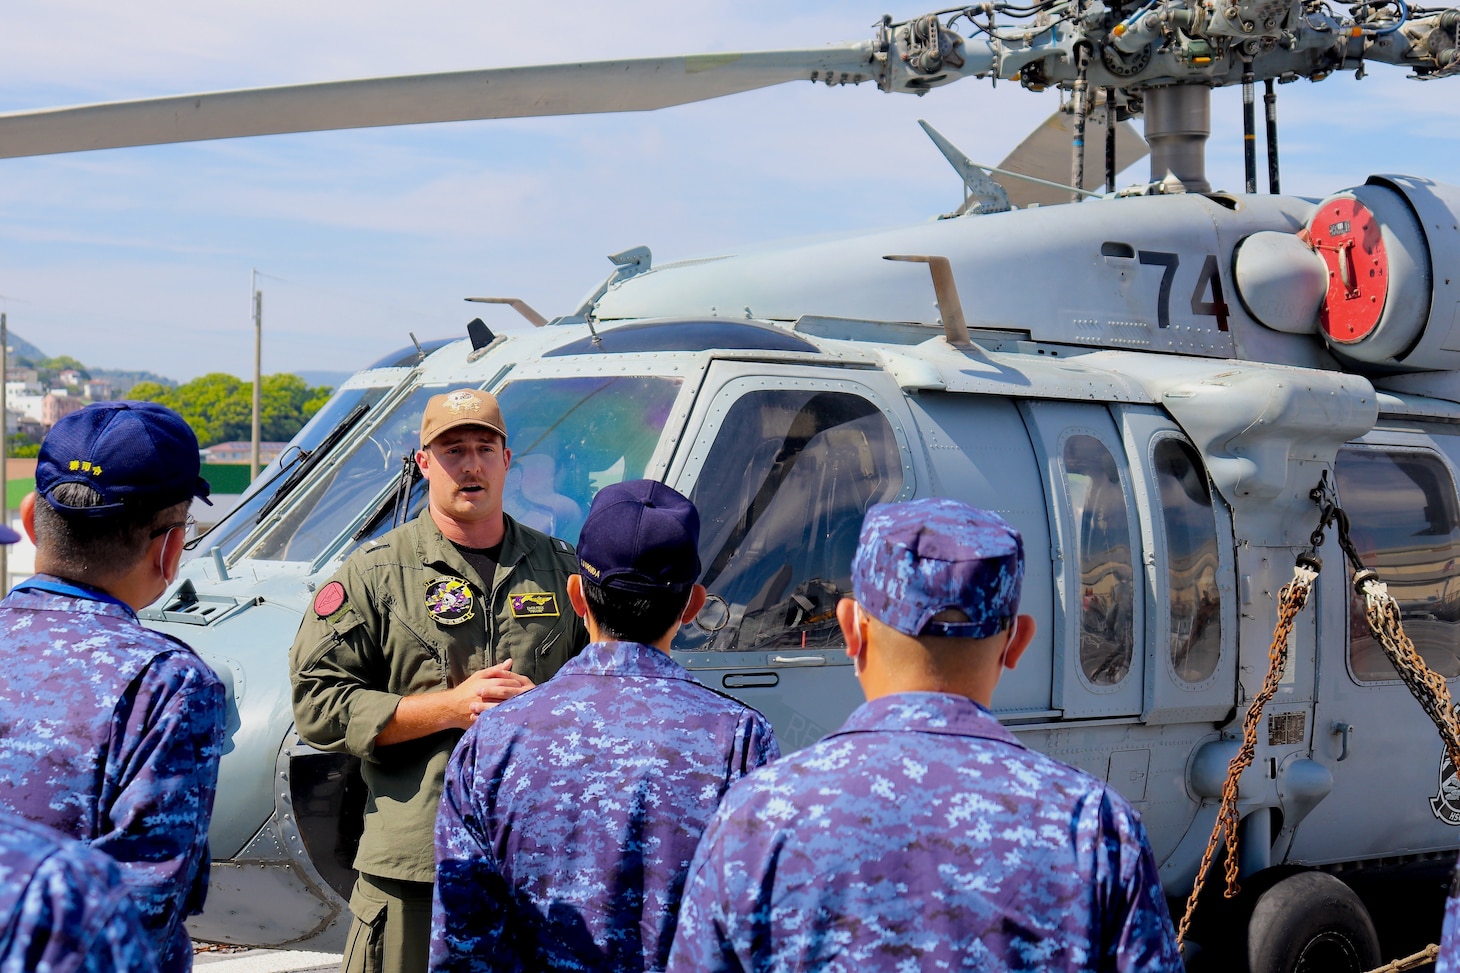 SASEBO, Japan (June 1, 2022) Lt. Zach Peck, from Windsor, Colorado, describes to Japan Maritime Self-Defense Force officers the role of an MH-60S Sea Hawk helicopter in the mine warfare mission set assigned to the Independence-class littoral combat ship USS Charleston (LCS 18). Charleston, part of Destroyer Squadron (DESRON) 7, is on a rotational deployment, operating in the U.S. 7th Fleet area of operations to enhance interoperability with partners and serve as a ready-response force in support of a free and open Indo-Pacific region. (U.S. Navy photo by Lt. j.g. James French)